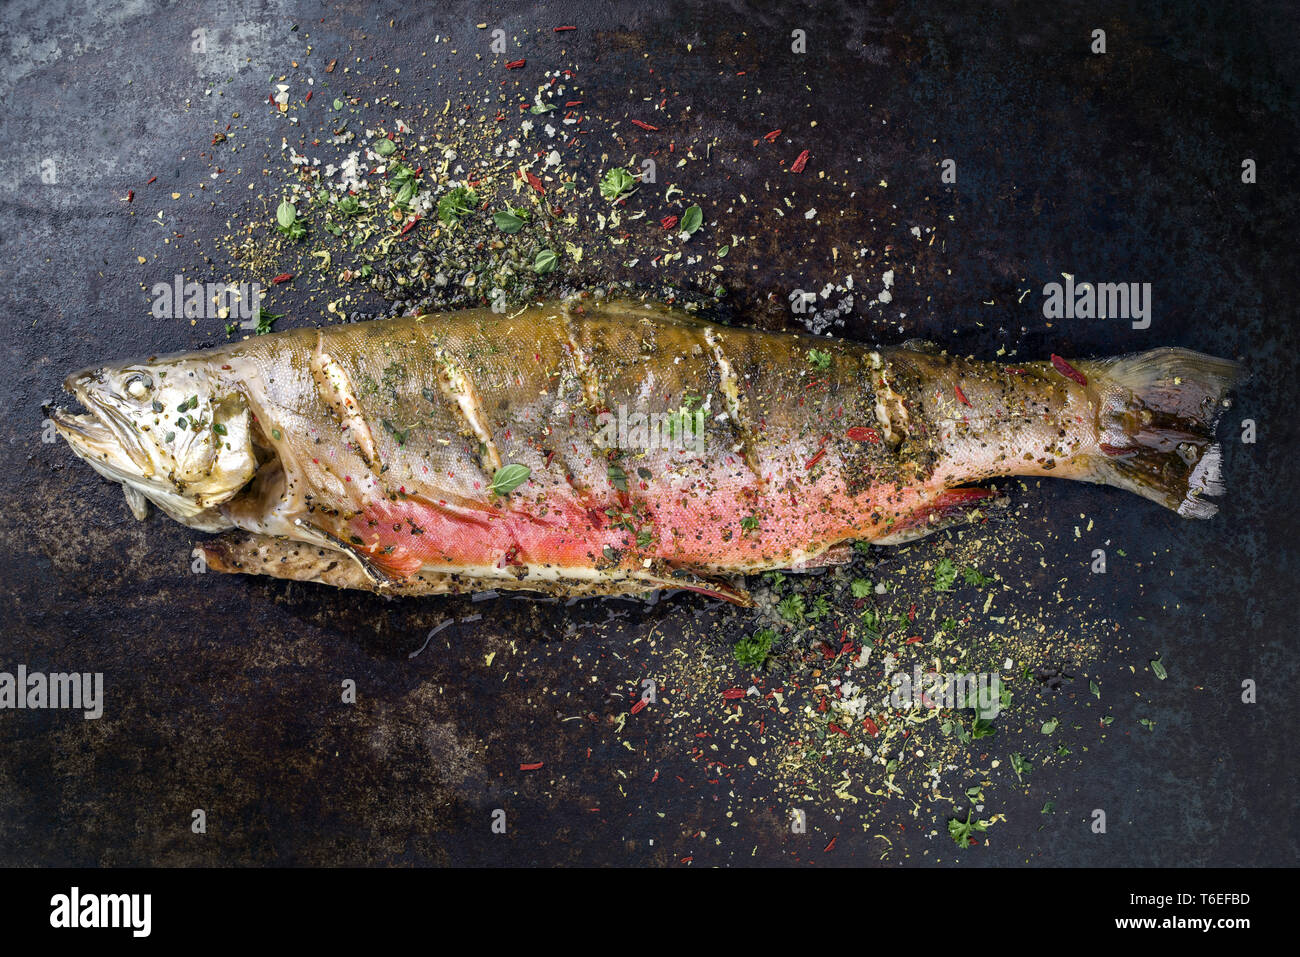 Barbecue char with herbs as top view on an old metal sheet Stock Photo